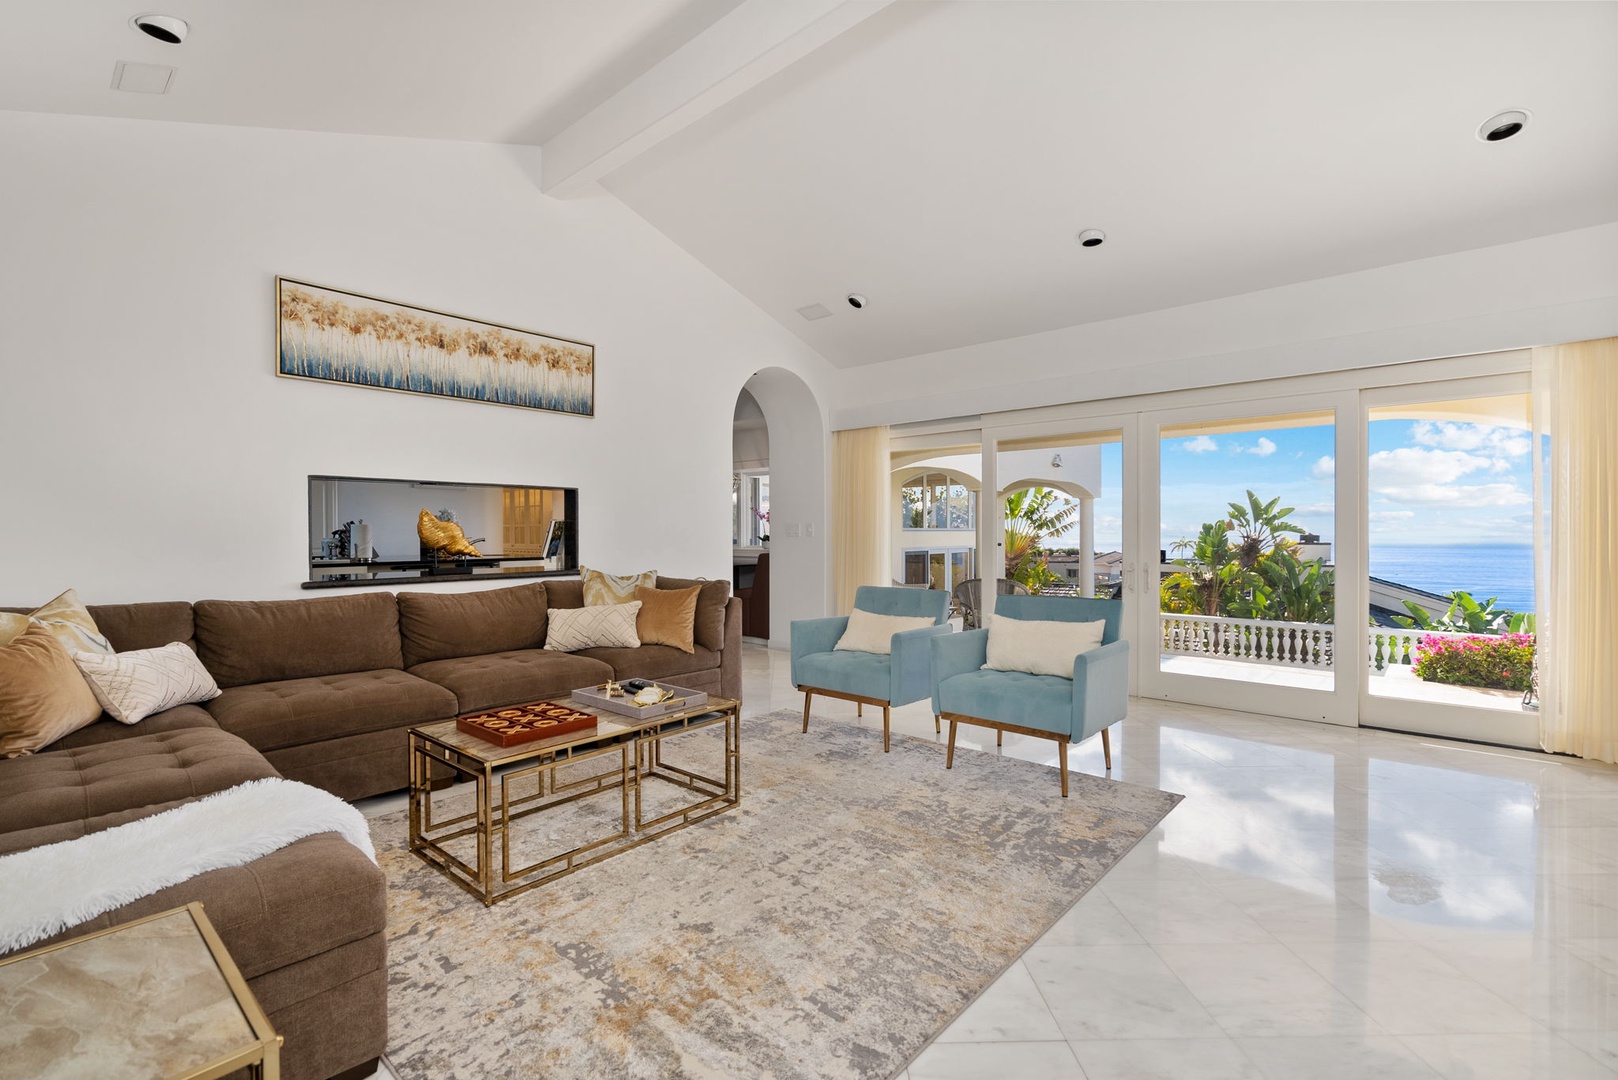 Honolulu Vacation Rentals, Hawaii Ridge Getaway - Family den with large windows for a bright and airy space.